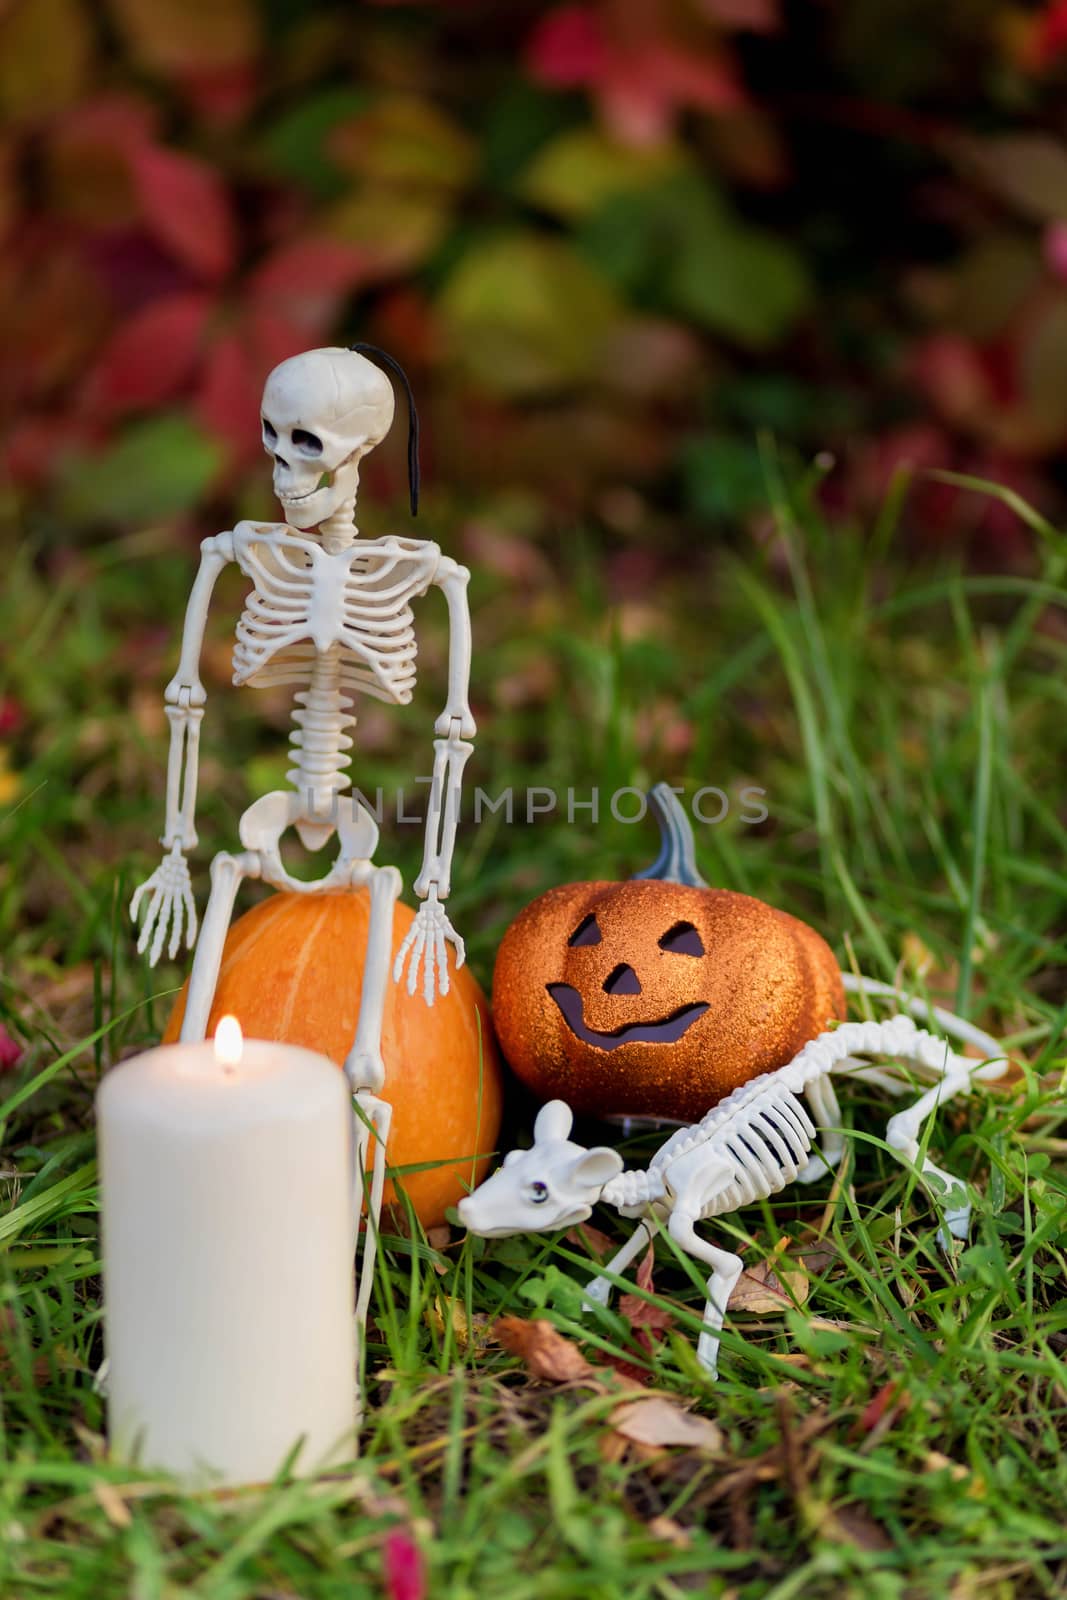 .Still life of skeletons and pumpkins against the background of autumn foliage by galinasharapova